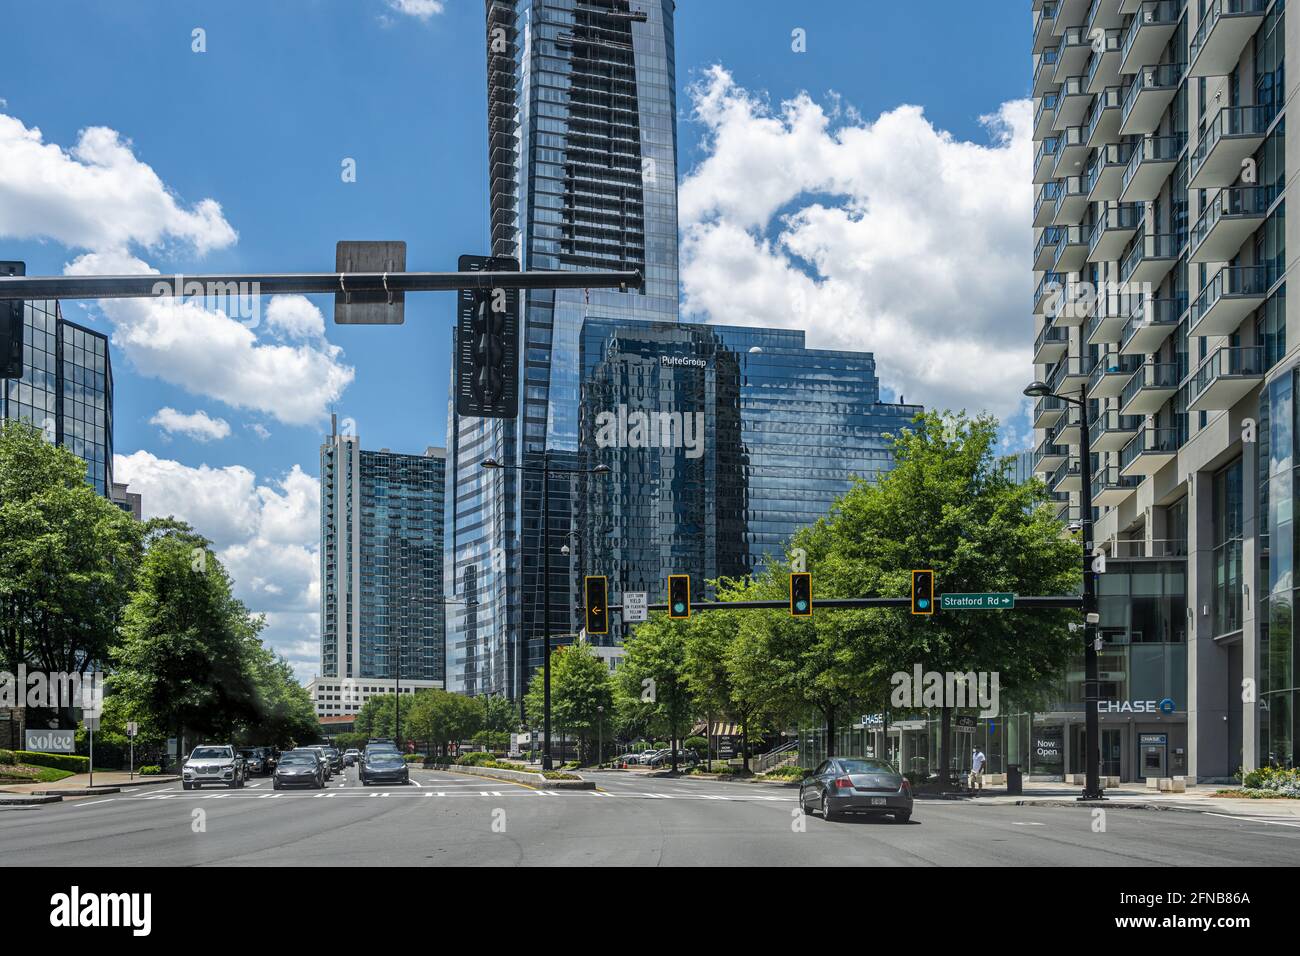 Street view along Peachtree Road with luxury high-rise condos and apartments in the Buckhead district of Atlanta, Georgia. (USA) Stock Photo